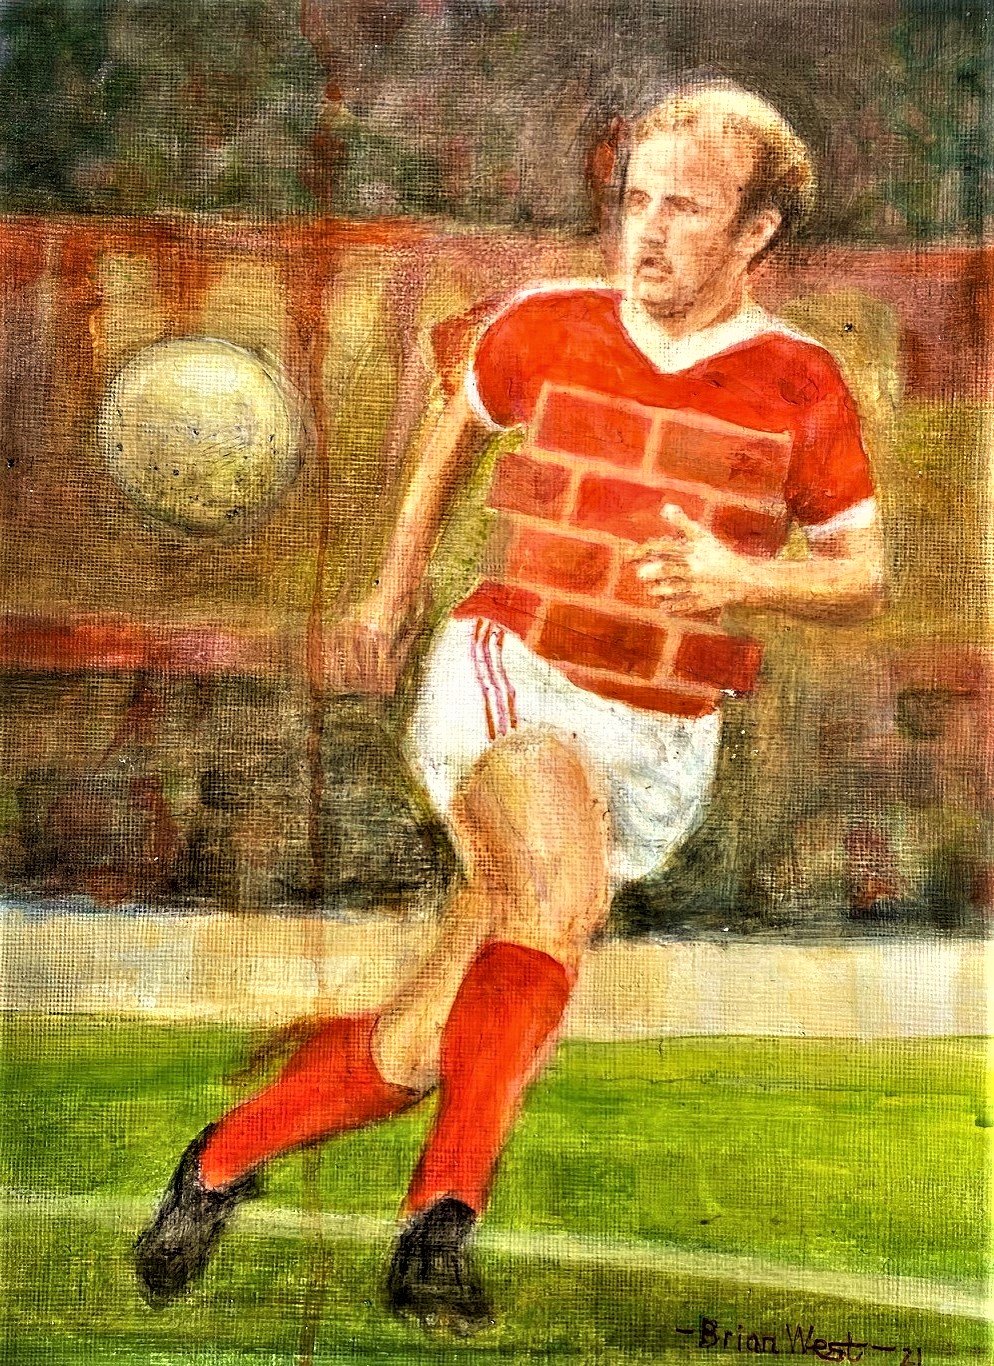 Kenny Burns - Starred during Nottingham Forest’s Euro Cup years period. Though an aggressive defender – he could also read a game.